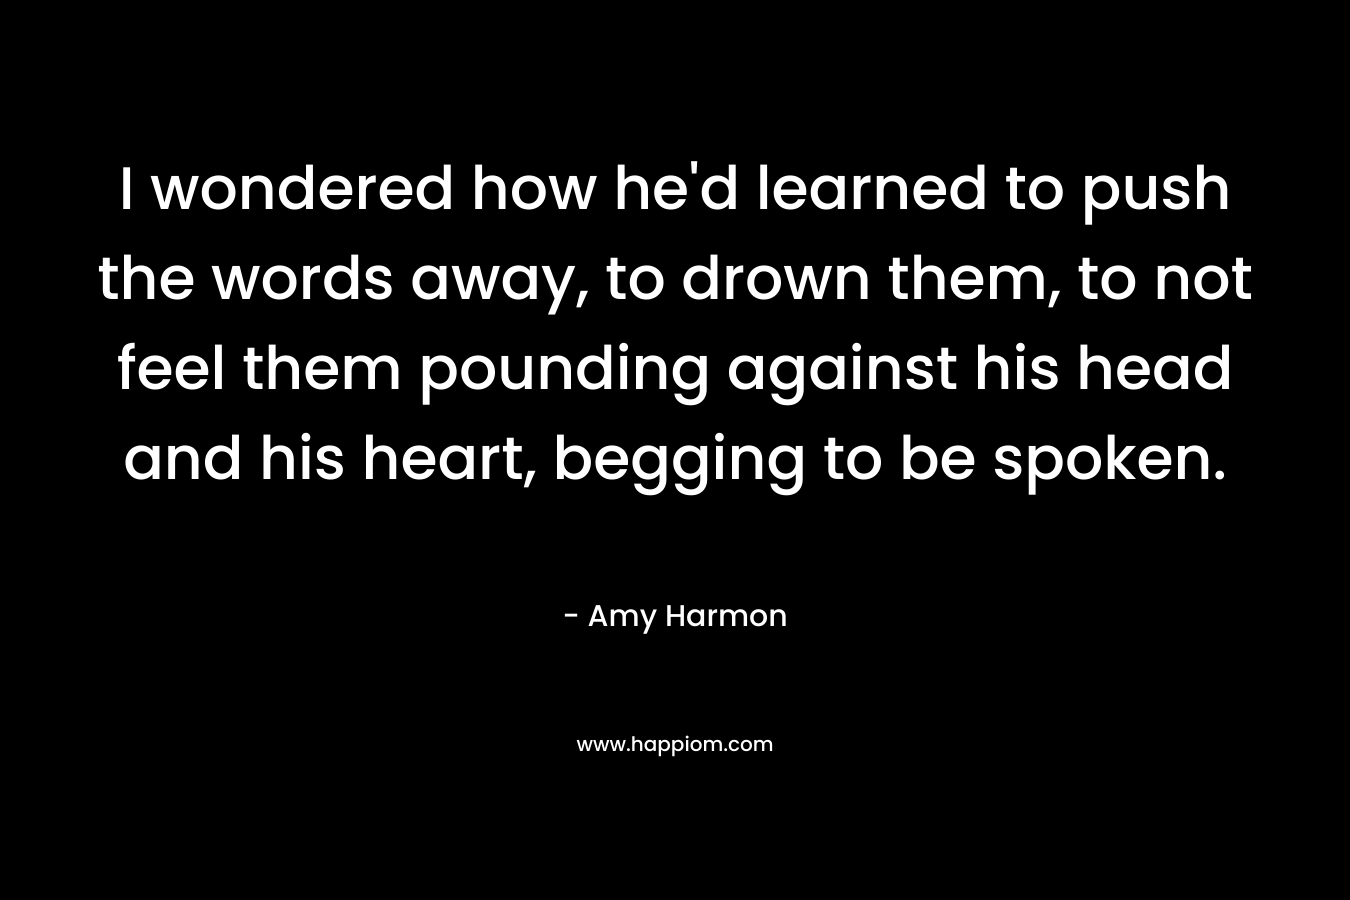 I wondered how he’d learned to push the words away, to drown them, to not feel them pounding against his head and his heart, begging to be spoken. – Amy Harmon